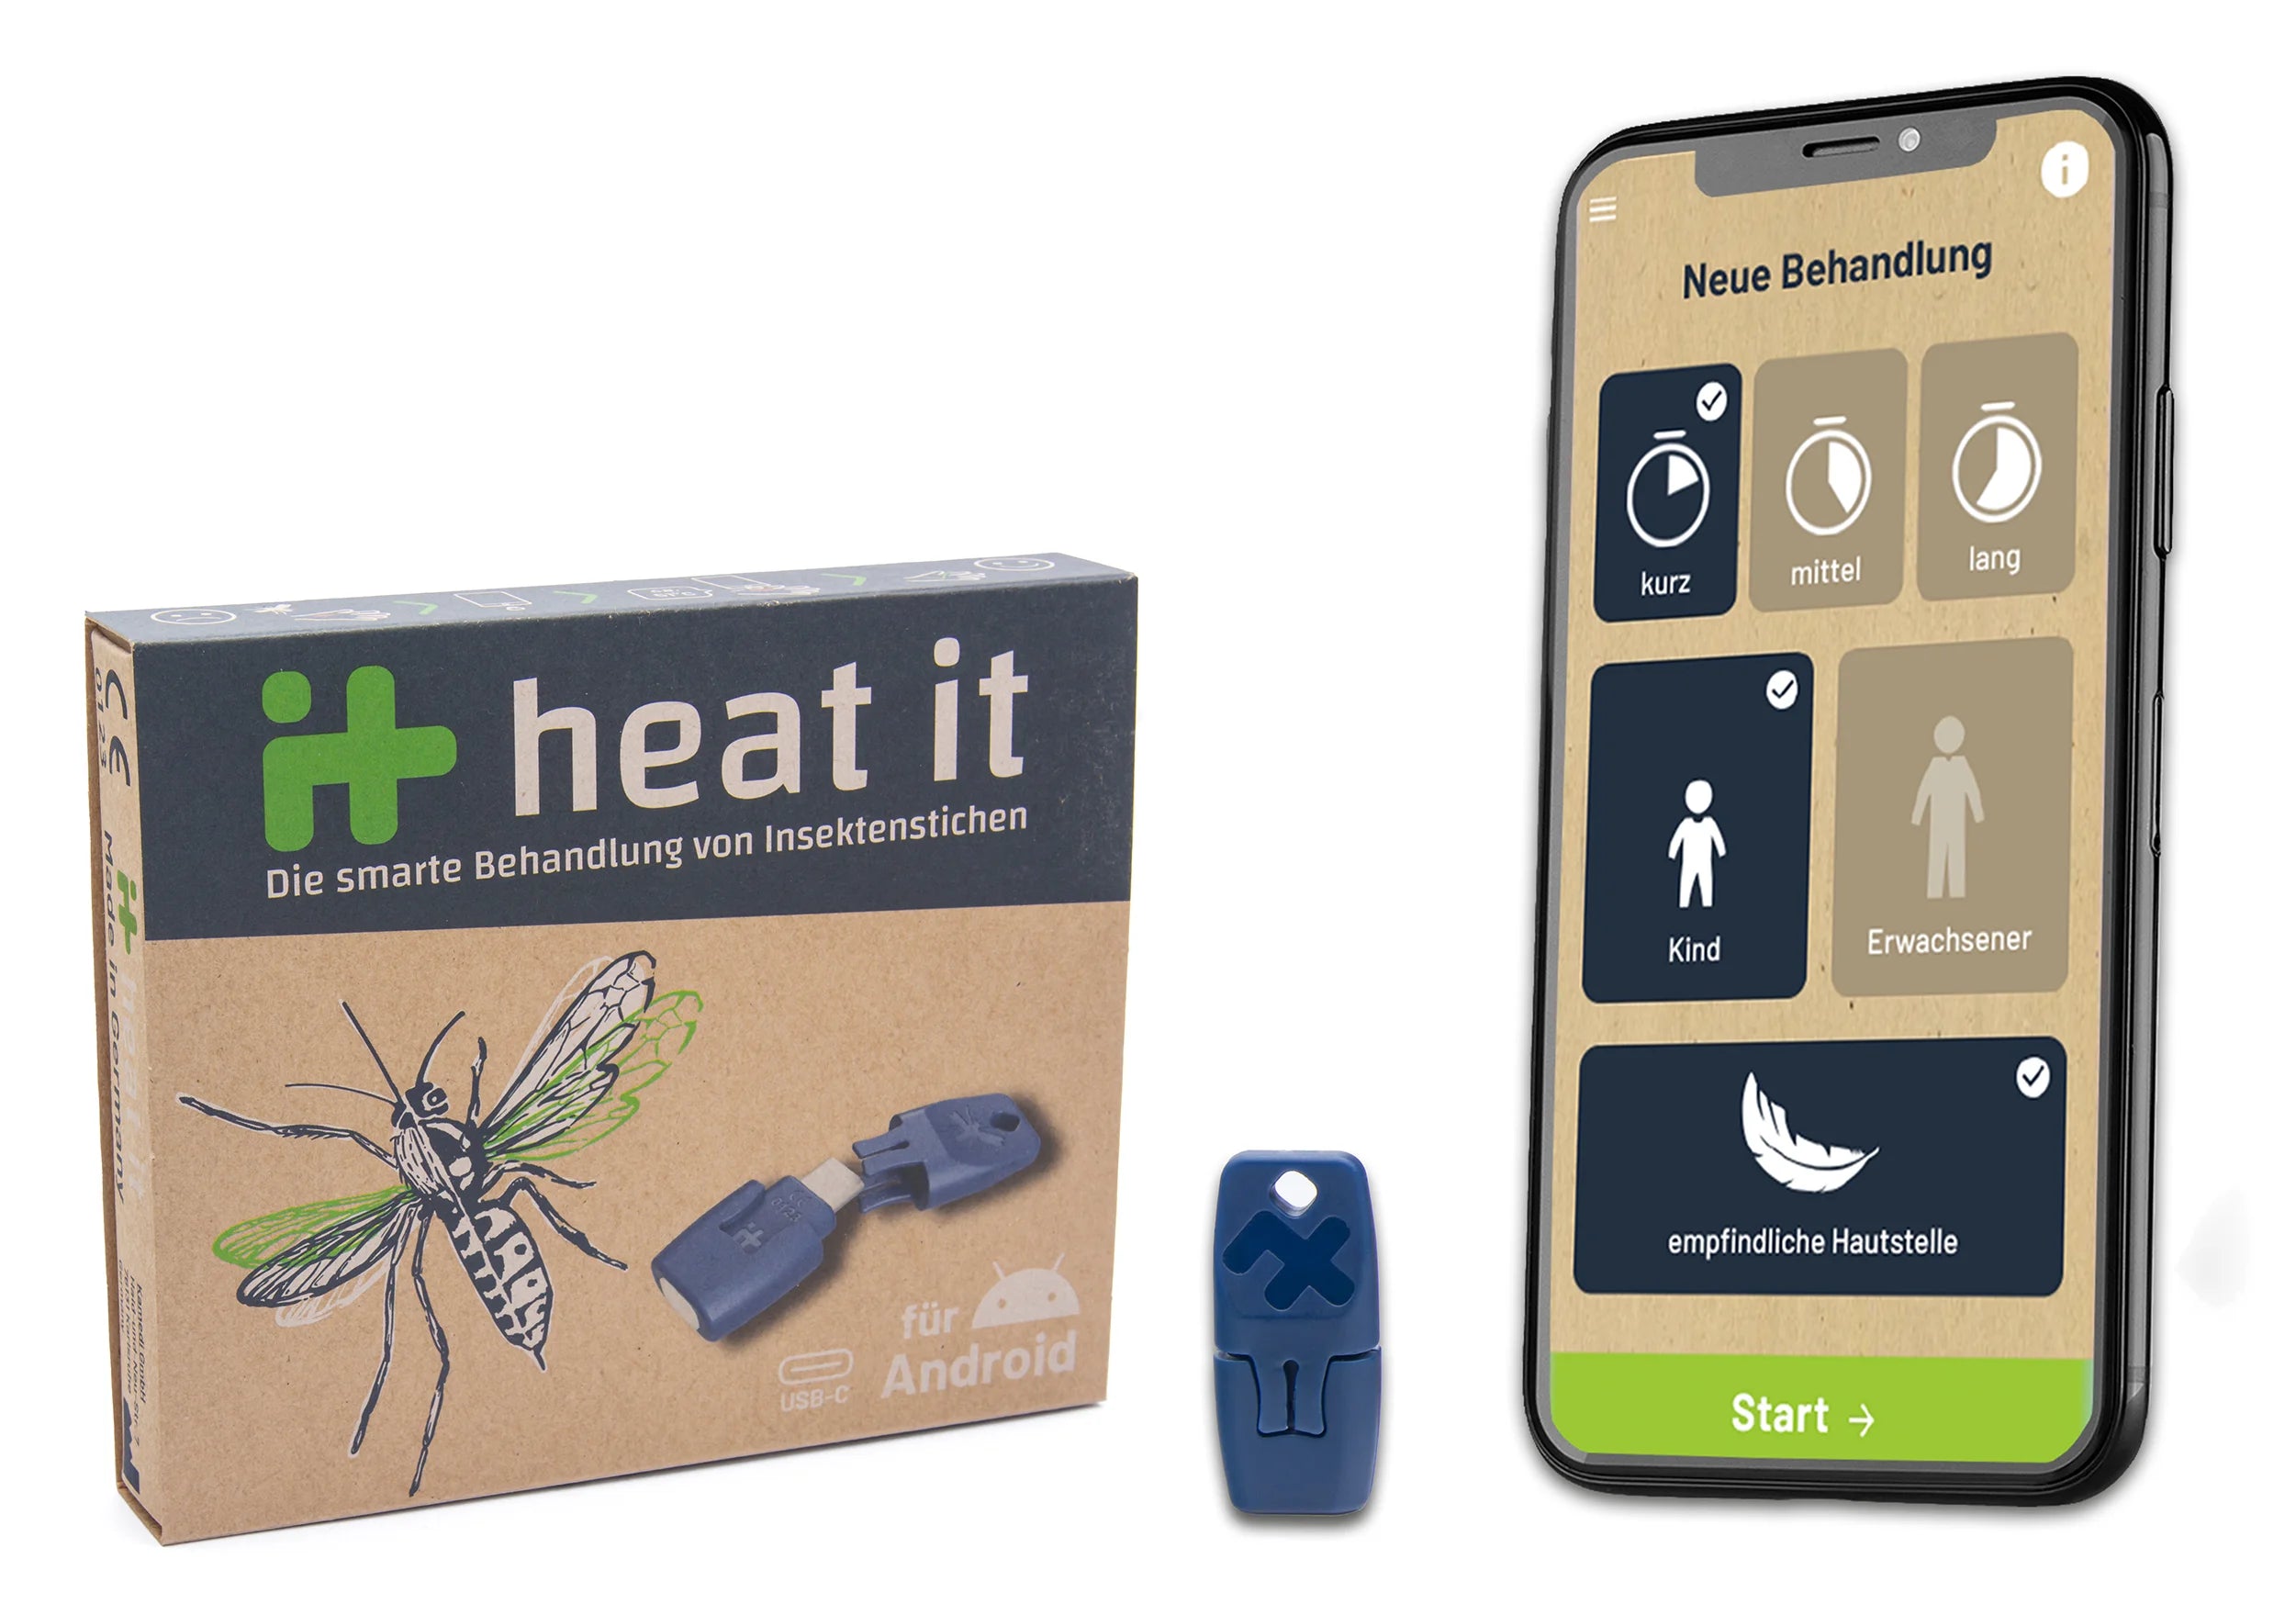 heat_it against itching from insect bites